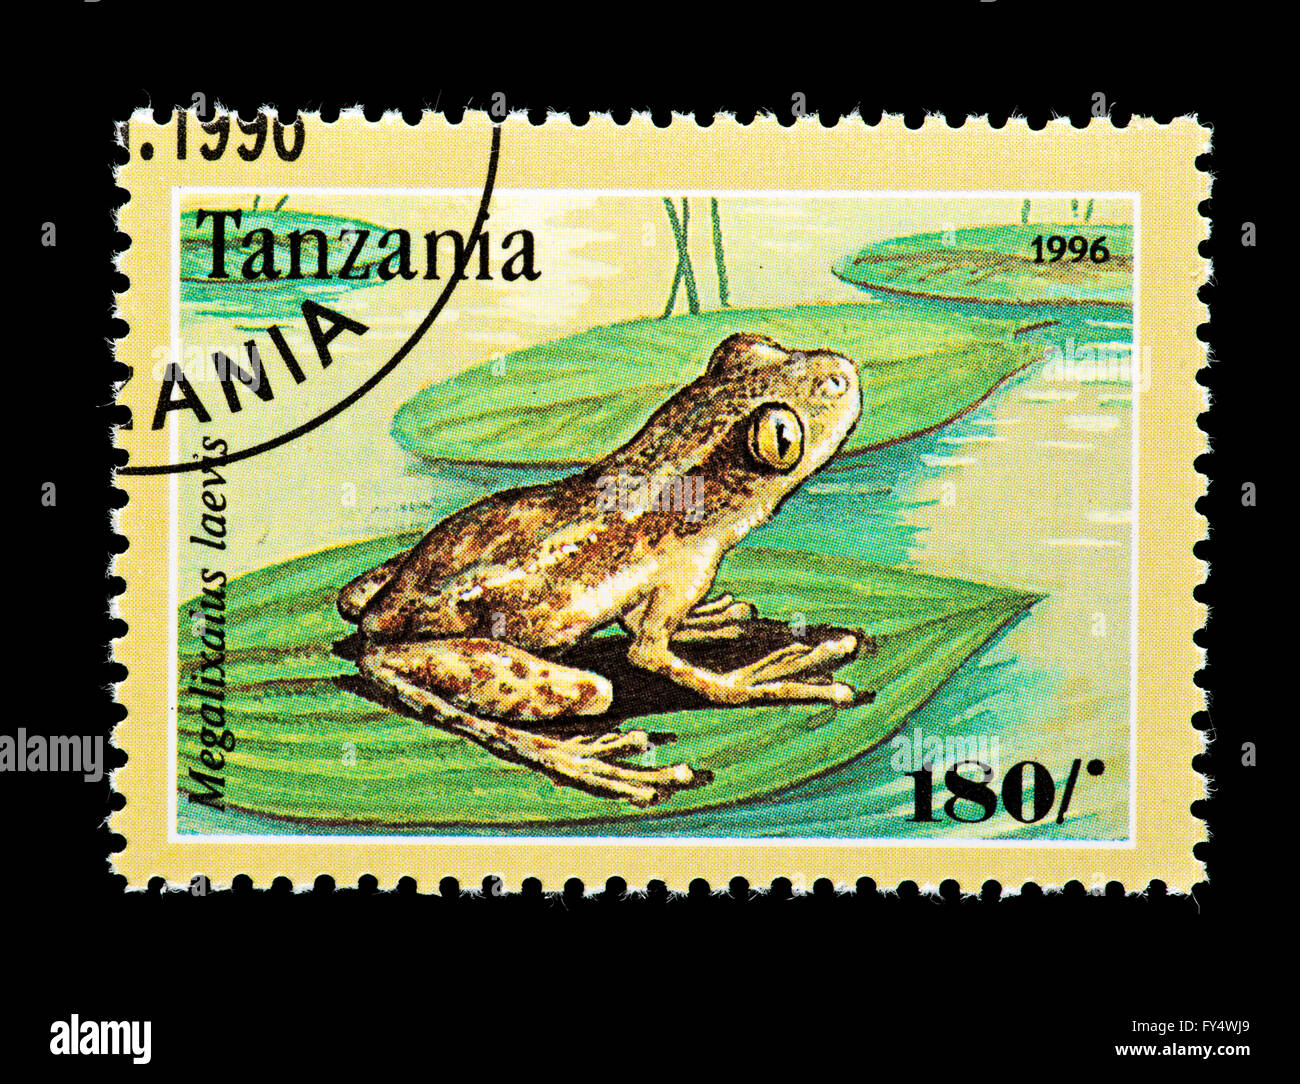 Postage stamp from Tanzania depicting a tropical frog (Megalixalus laevis) Stock Photo